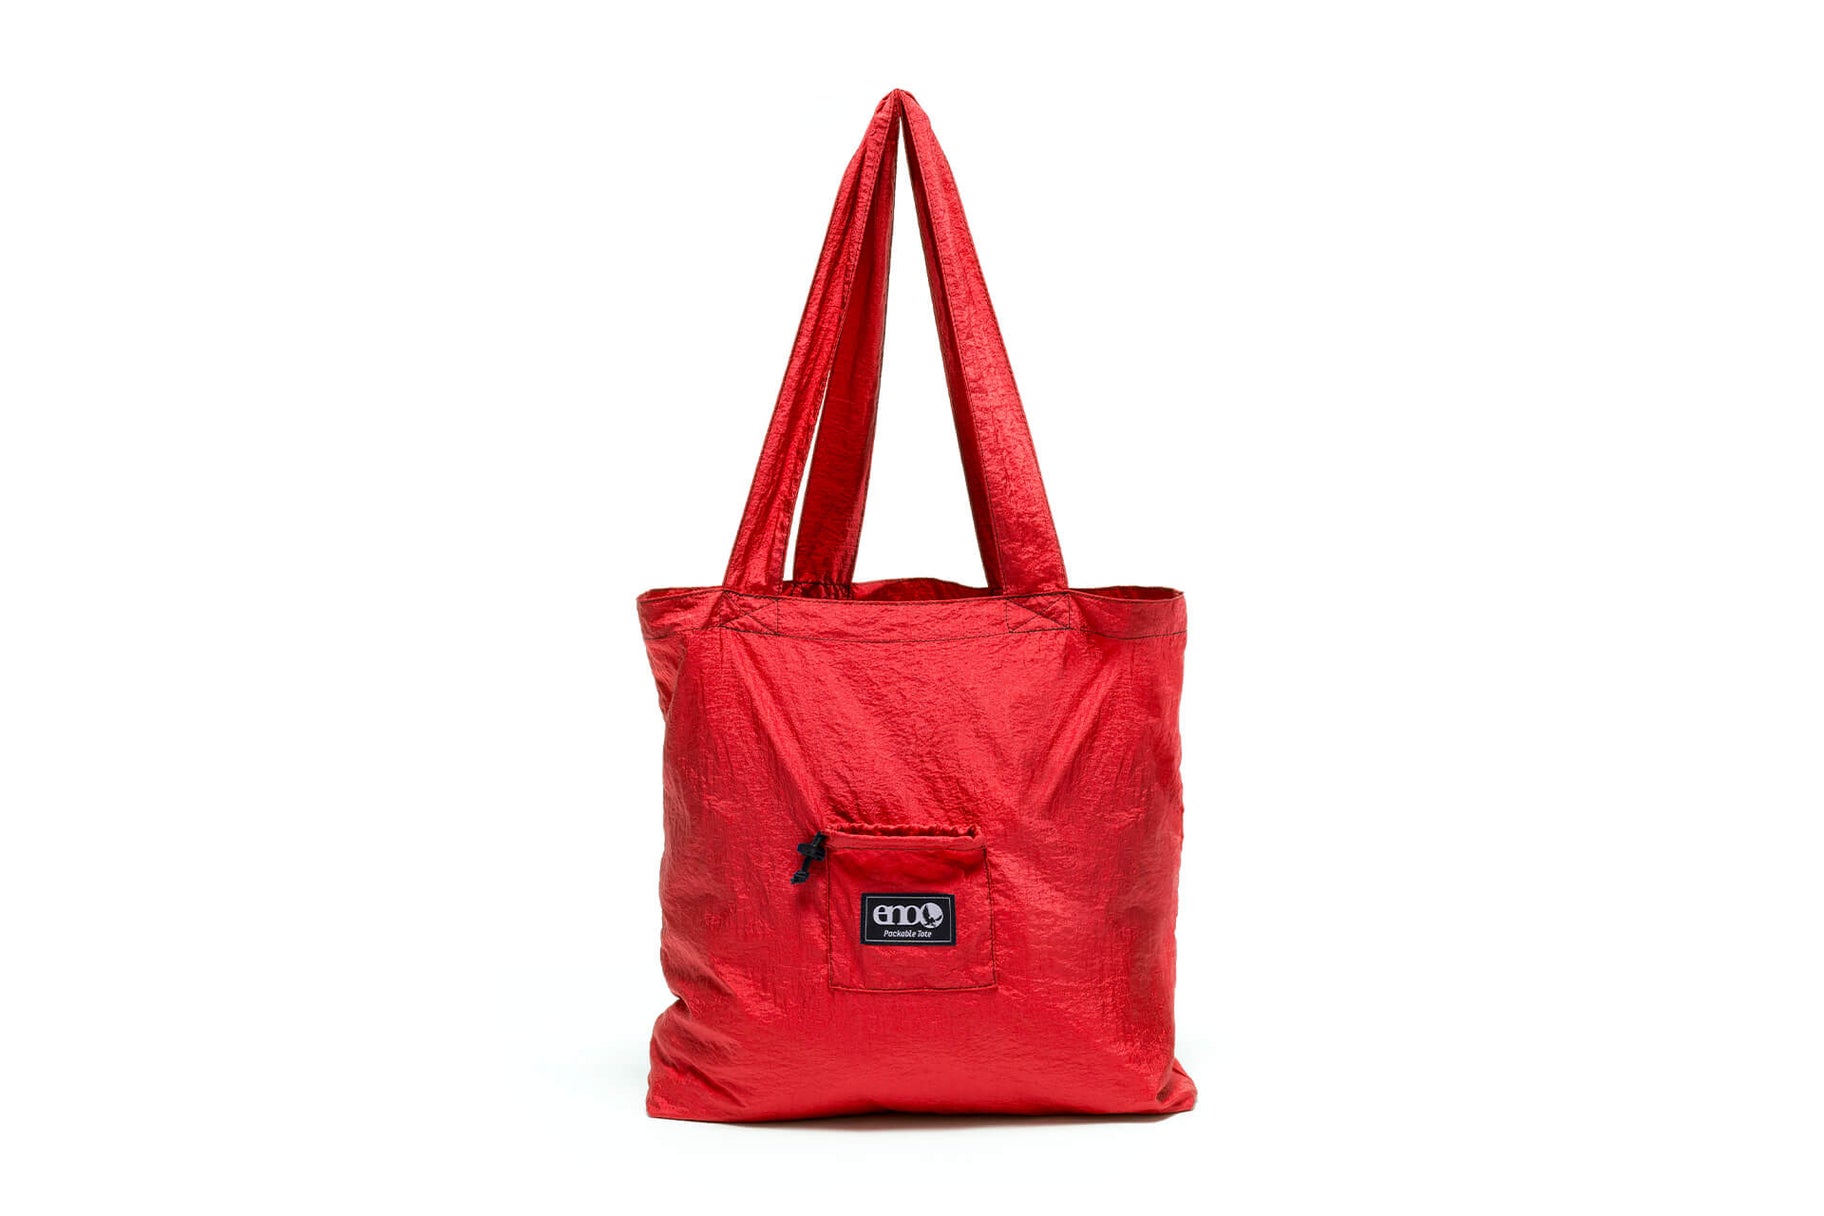 the go tote bag